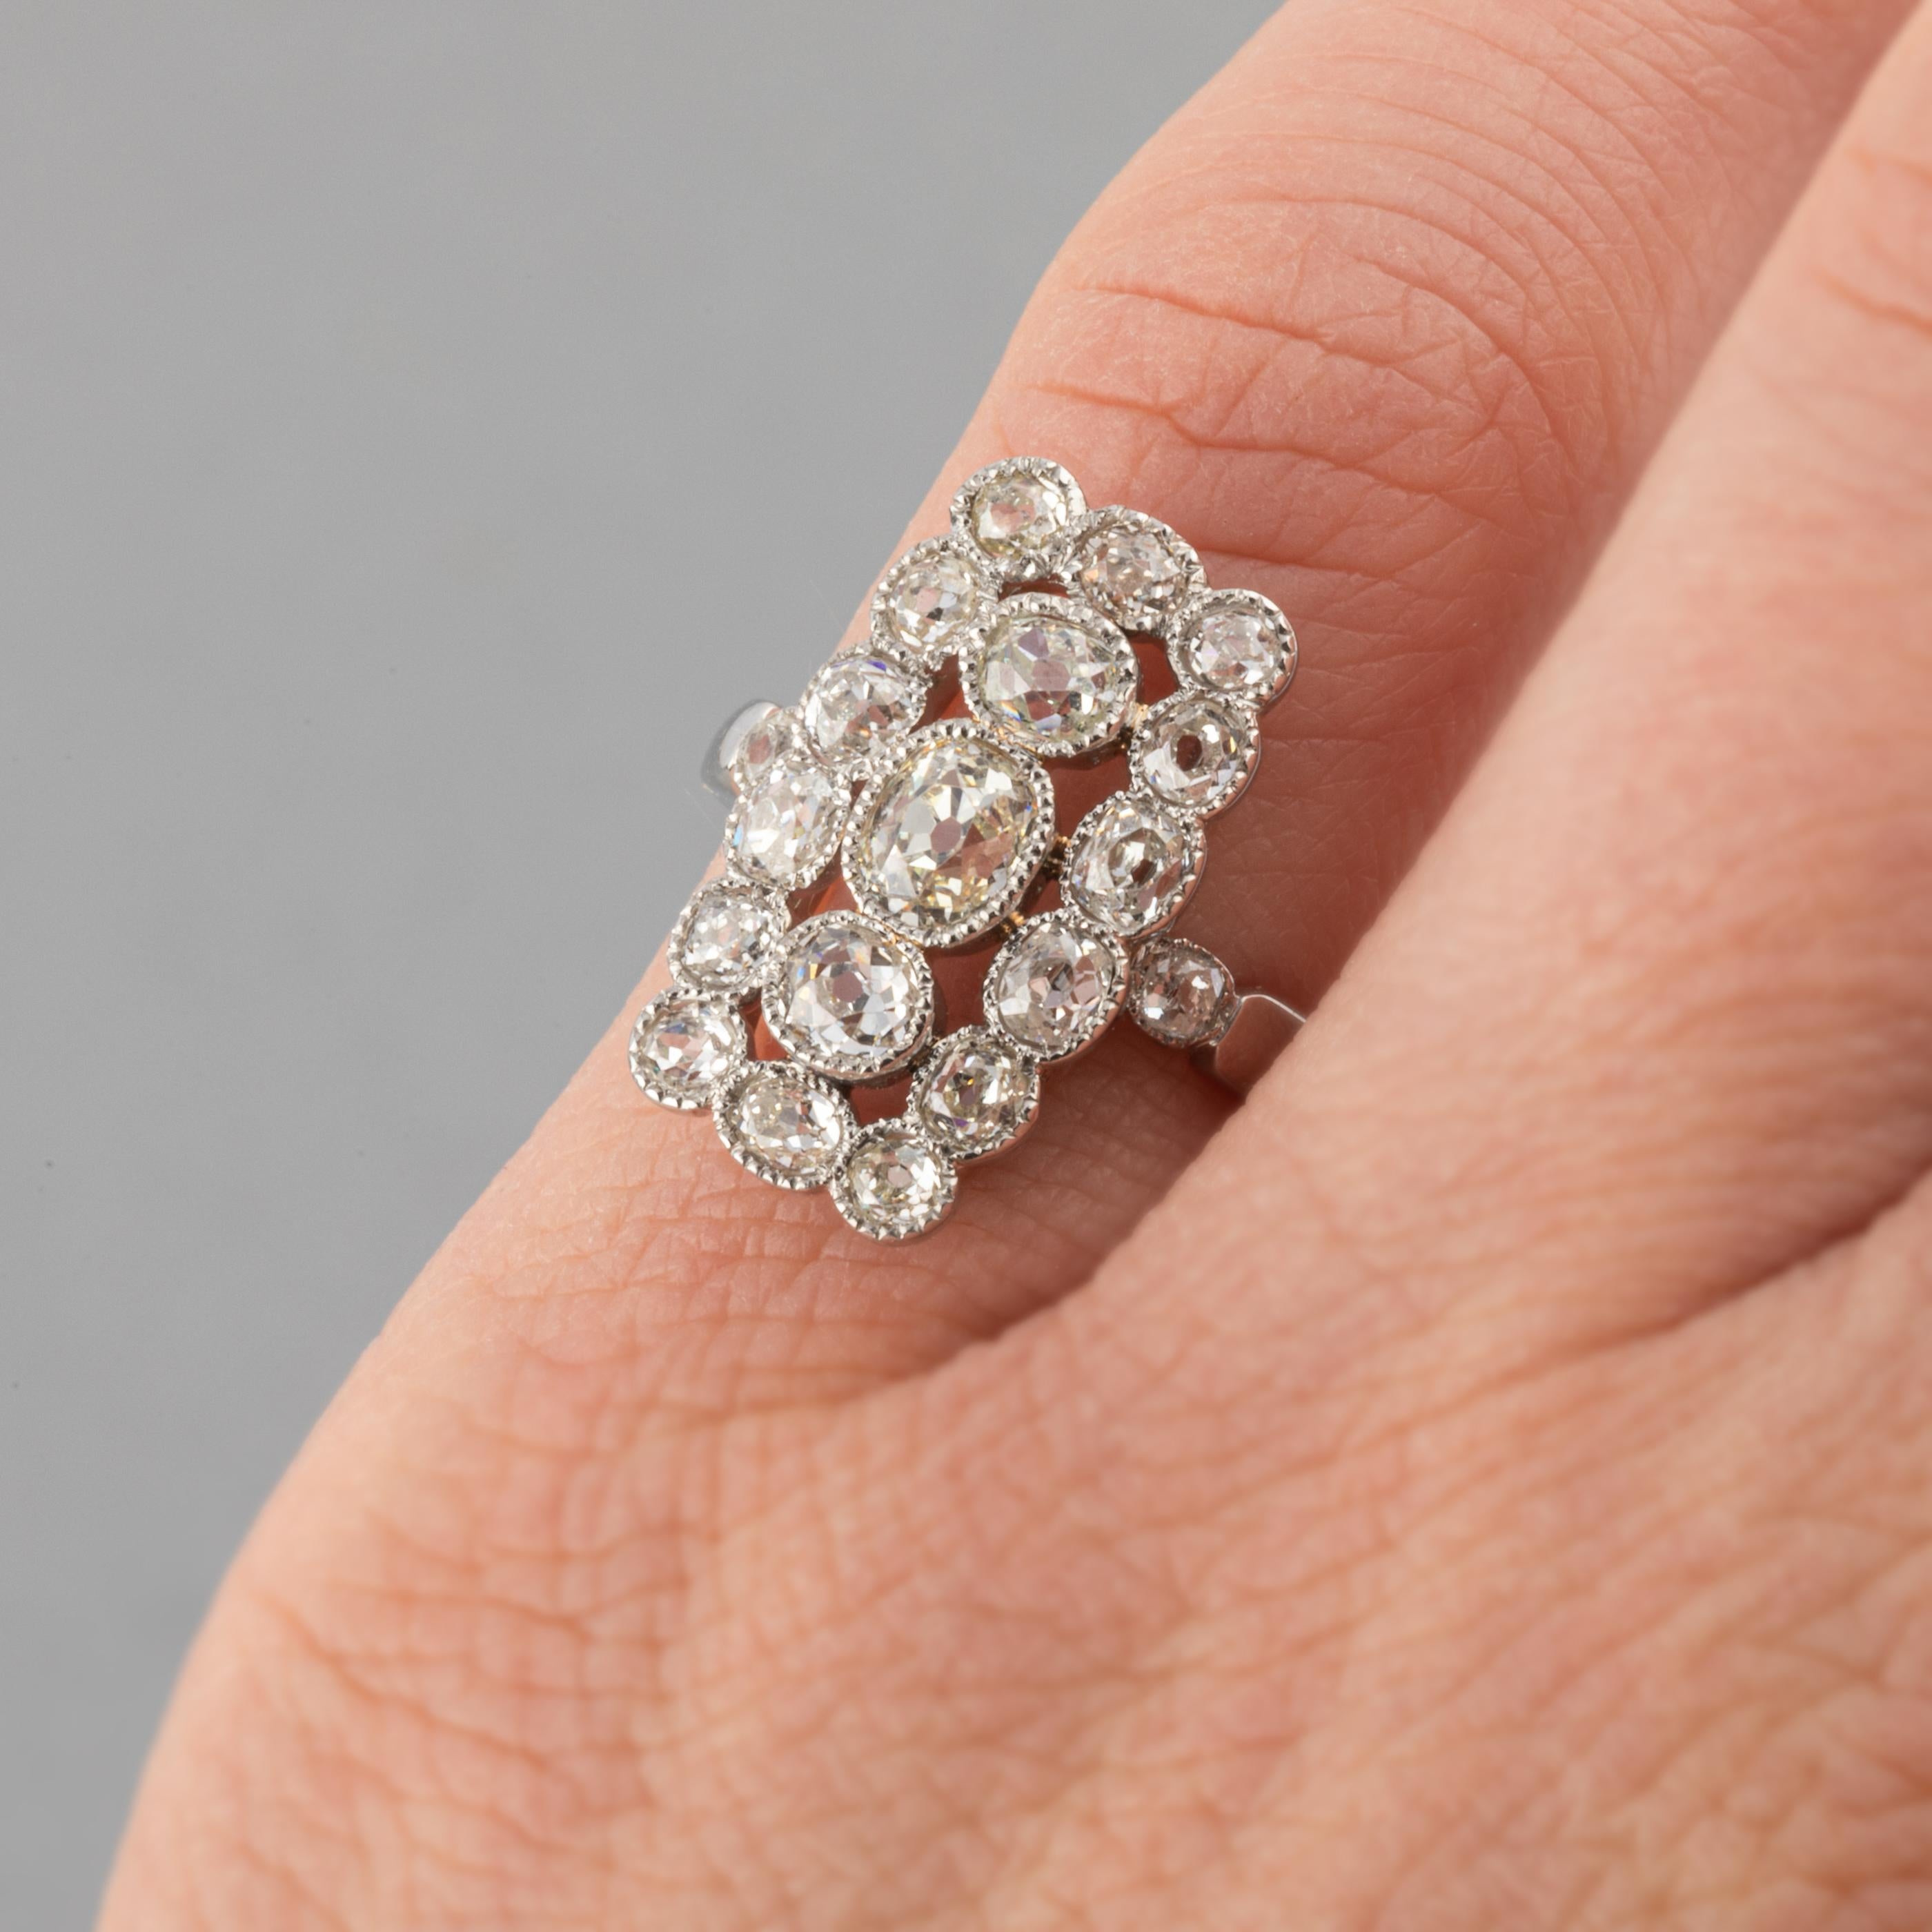 Very lovely ring, made in France circa 1920.
Made in platinum and set with old European cut diamonds. Hallmark for platinum: The old man.
The diamonds weights 1.50 carats total estimate. I/J color, they are clear.
Dimensions: 18mm* 11mm from above.